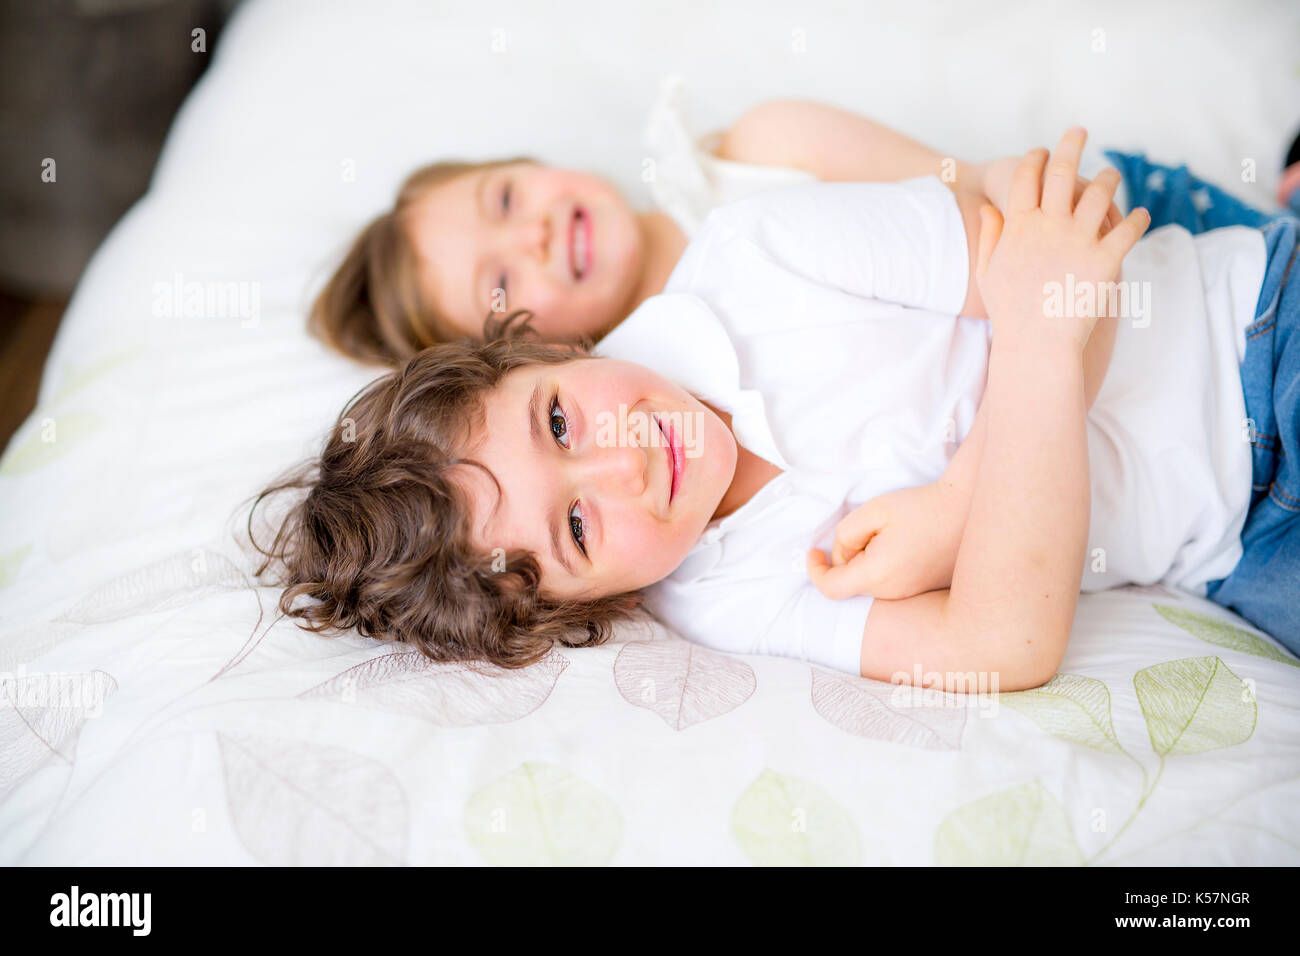 Brother And Sister Relaxing Together In Bed Stock Photo